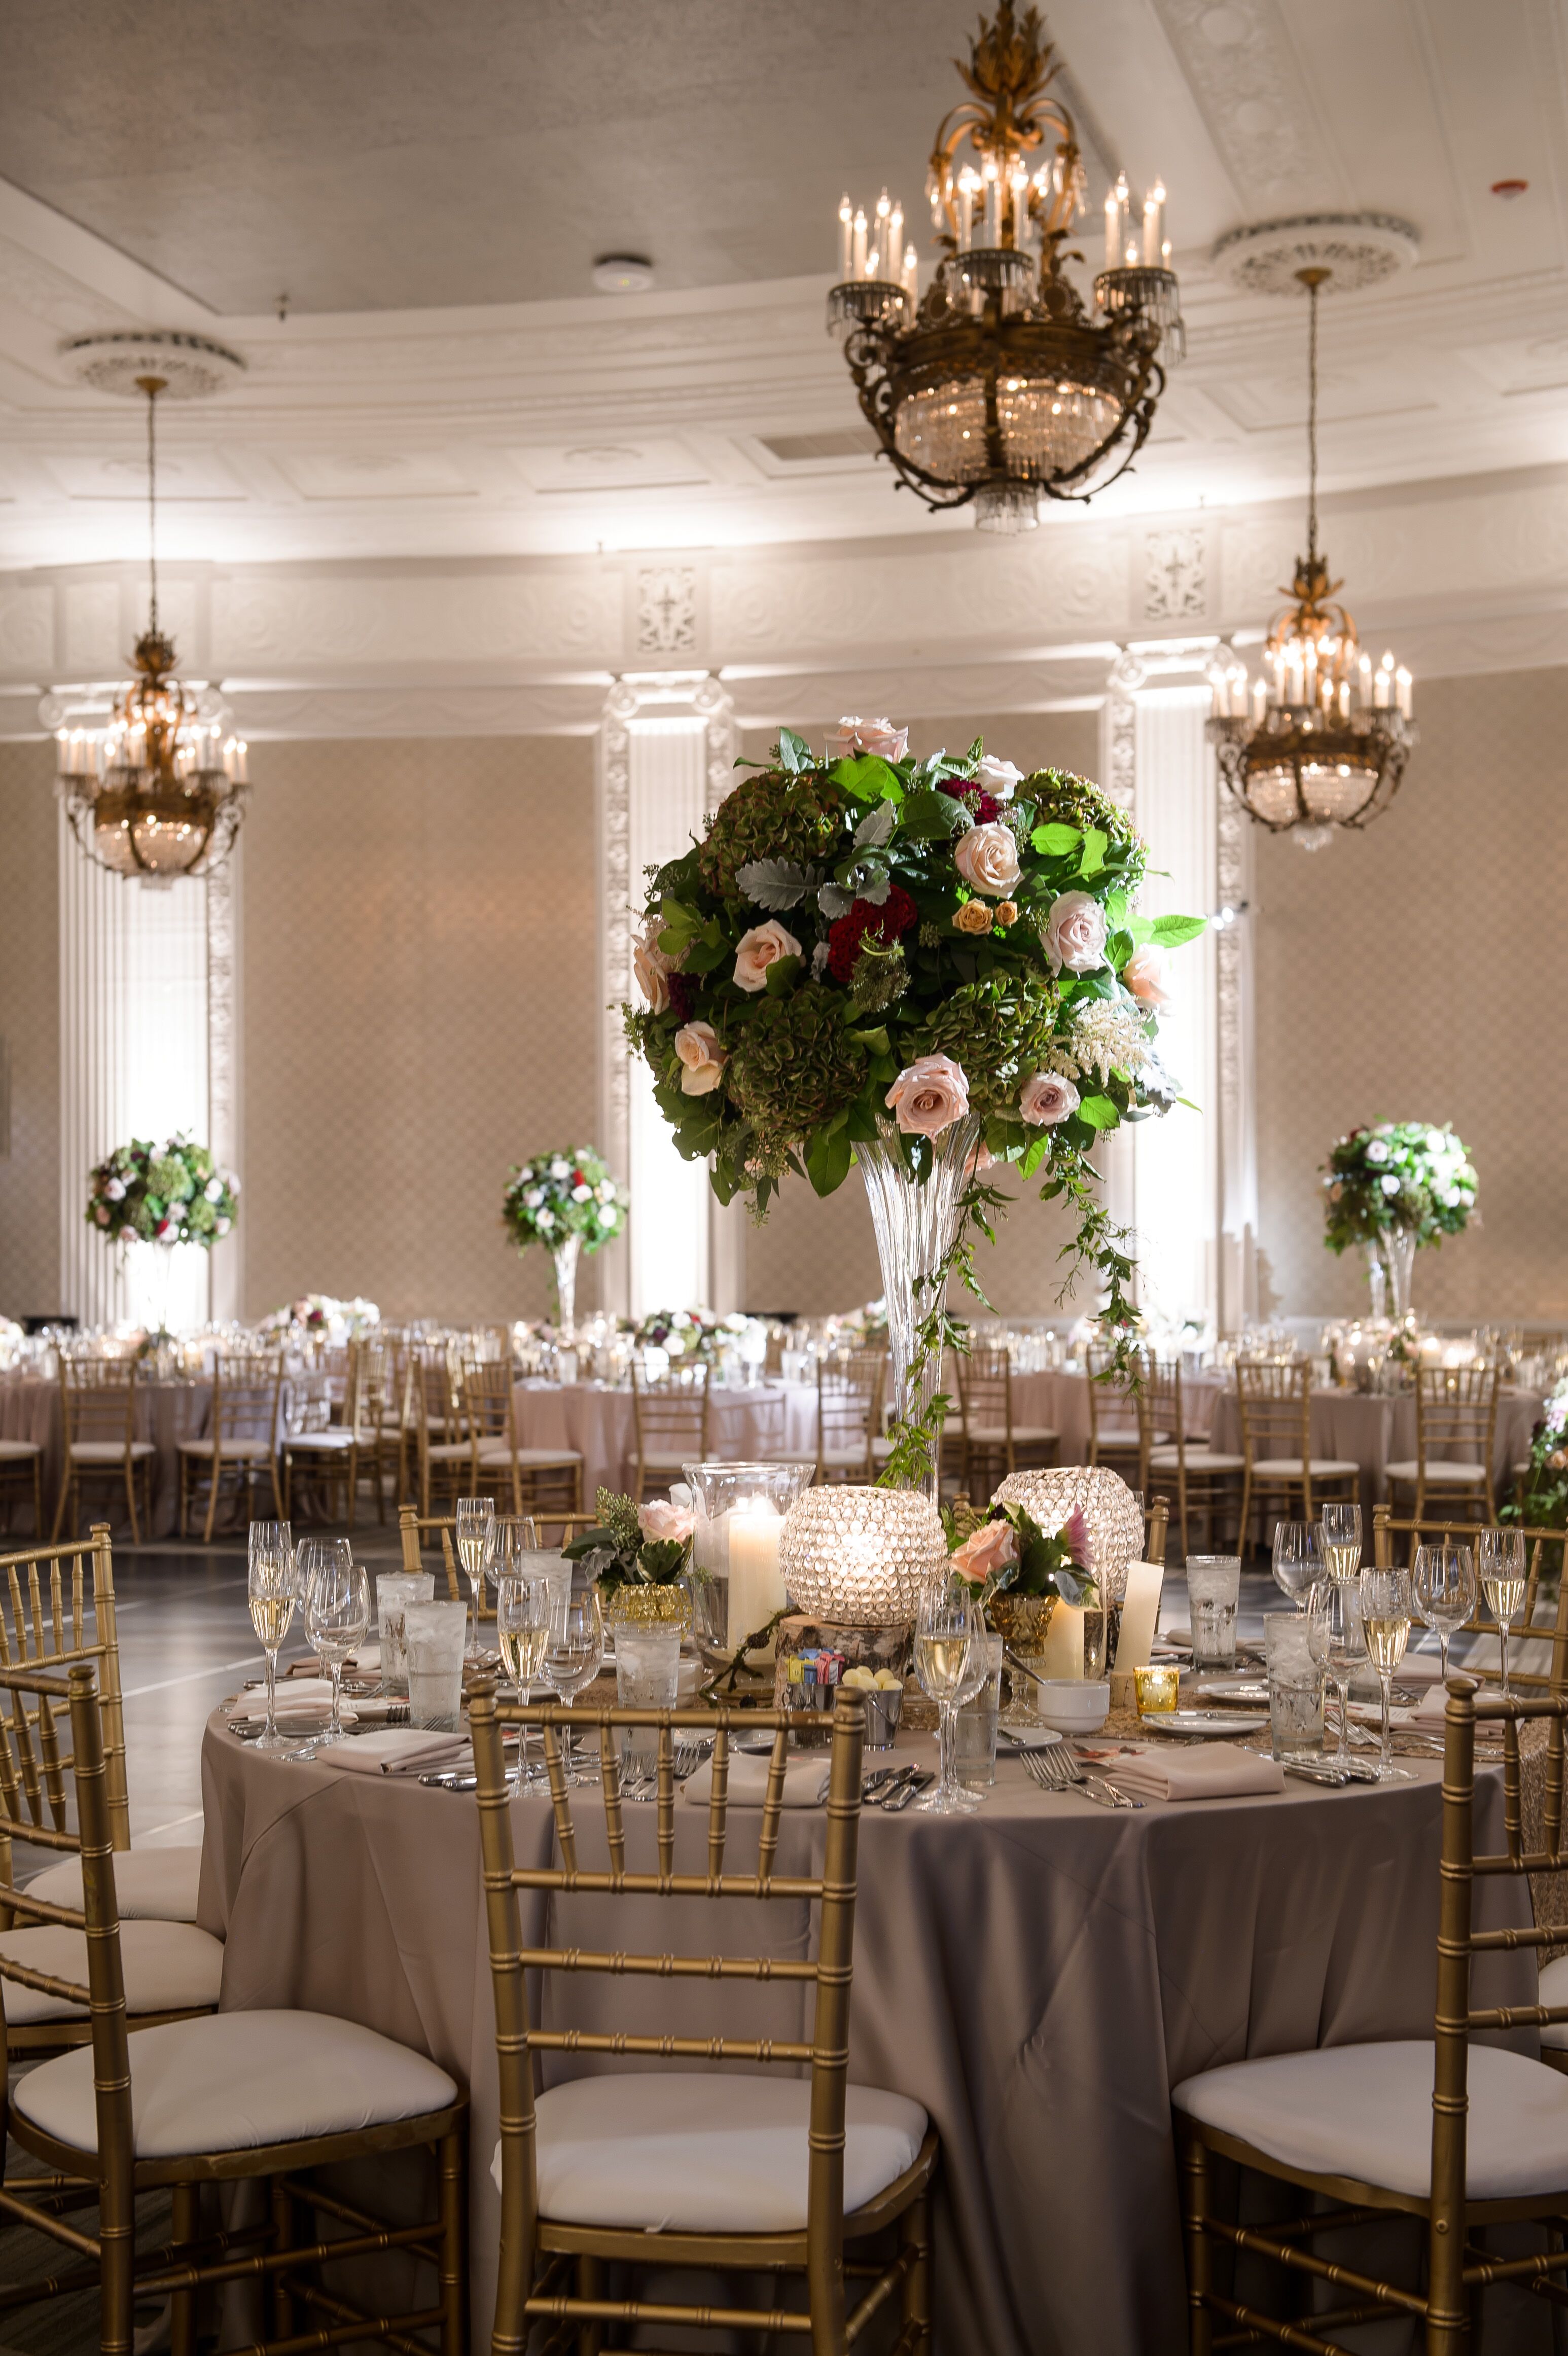 Tall Rose Centerpieces and Textured Glass Orbs